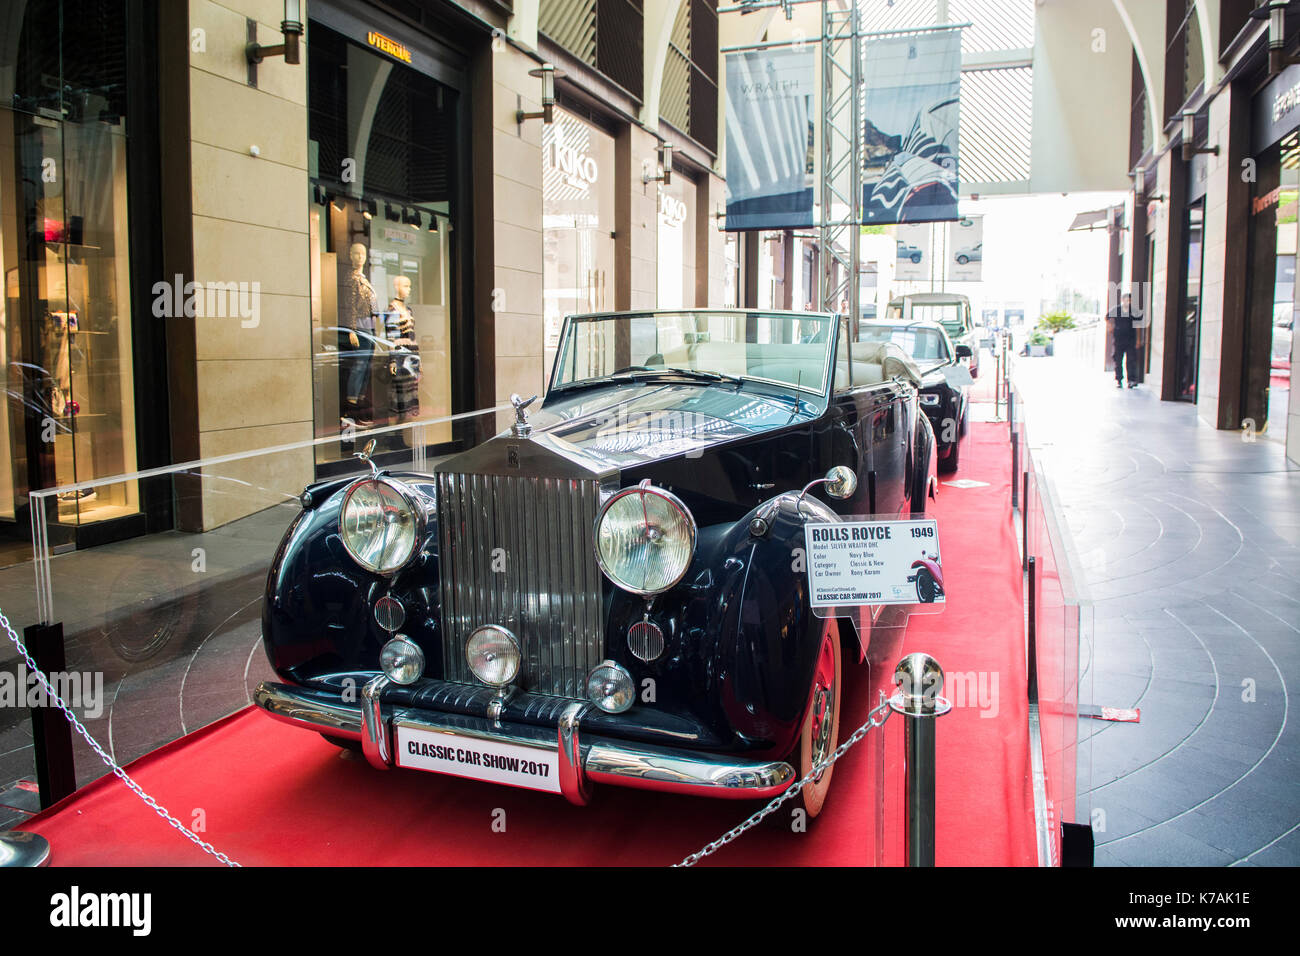 Beirut, Libano. Xv Sep, 2017. 1949 Rolls Royce Silver wraith dhc sul display al classic car show a Beirut souks, Beirut Libano credito: mohamad itani/alamy live news Foto Stock